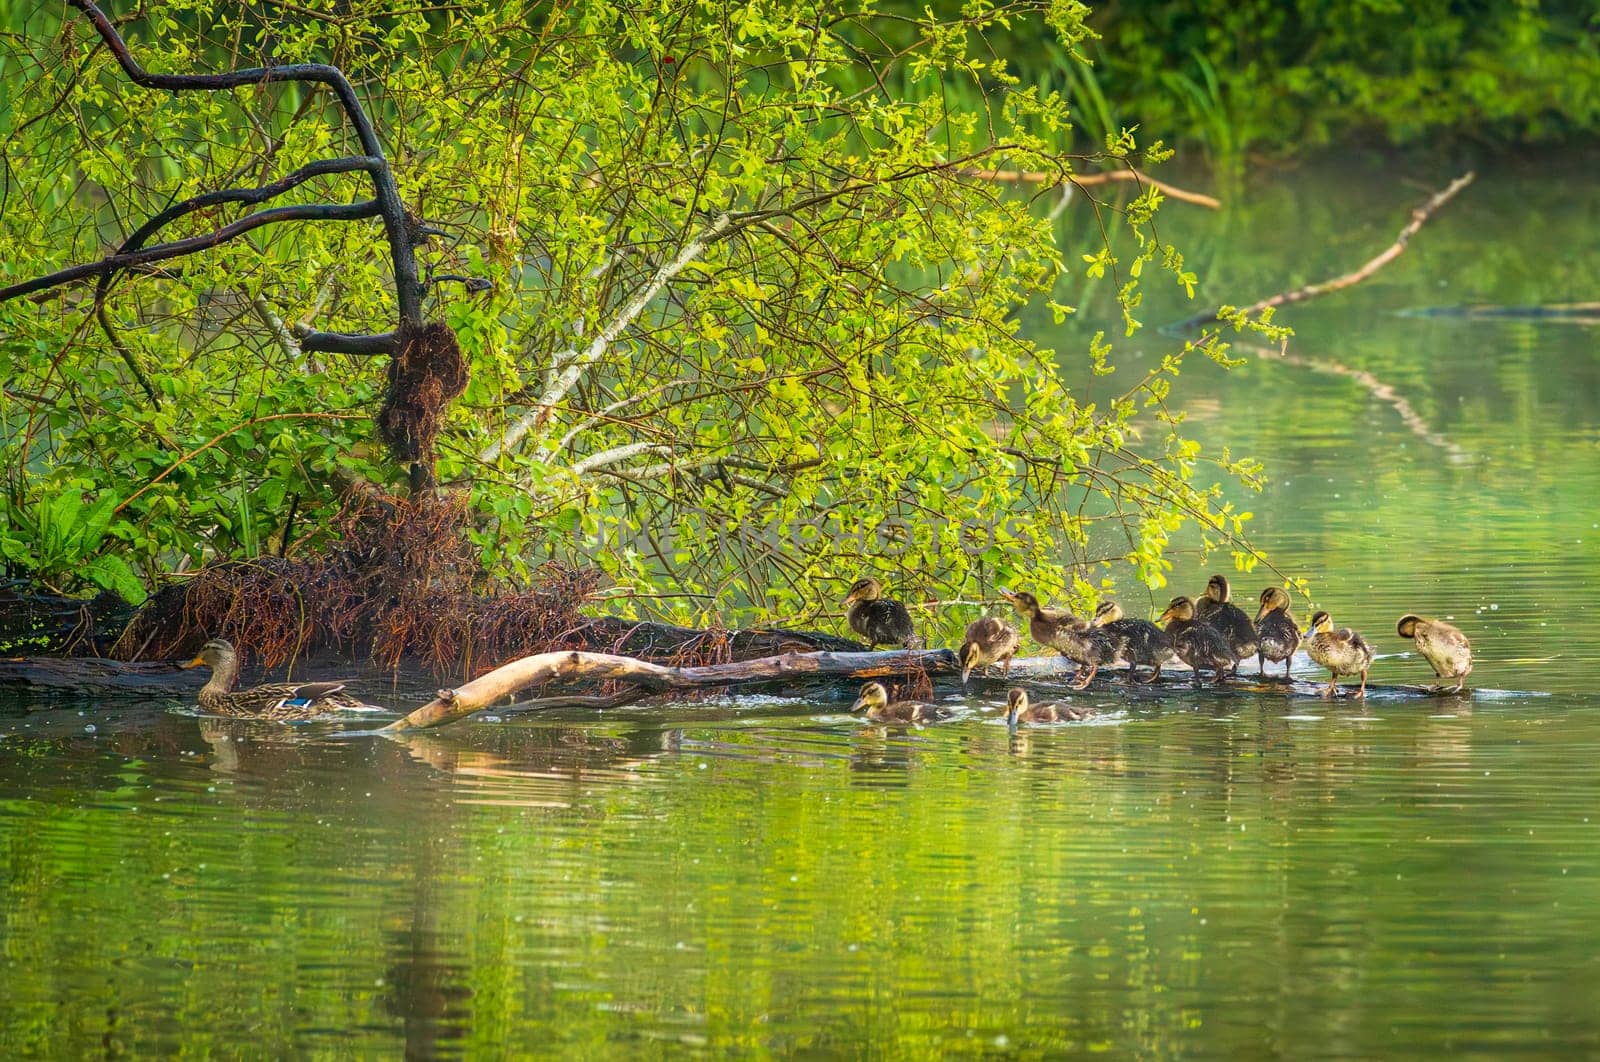 Group of ducklings standing on log in lake at dusk by steheap